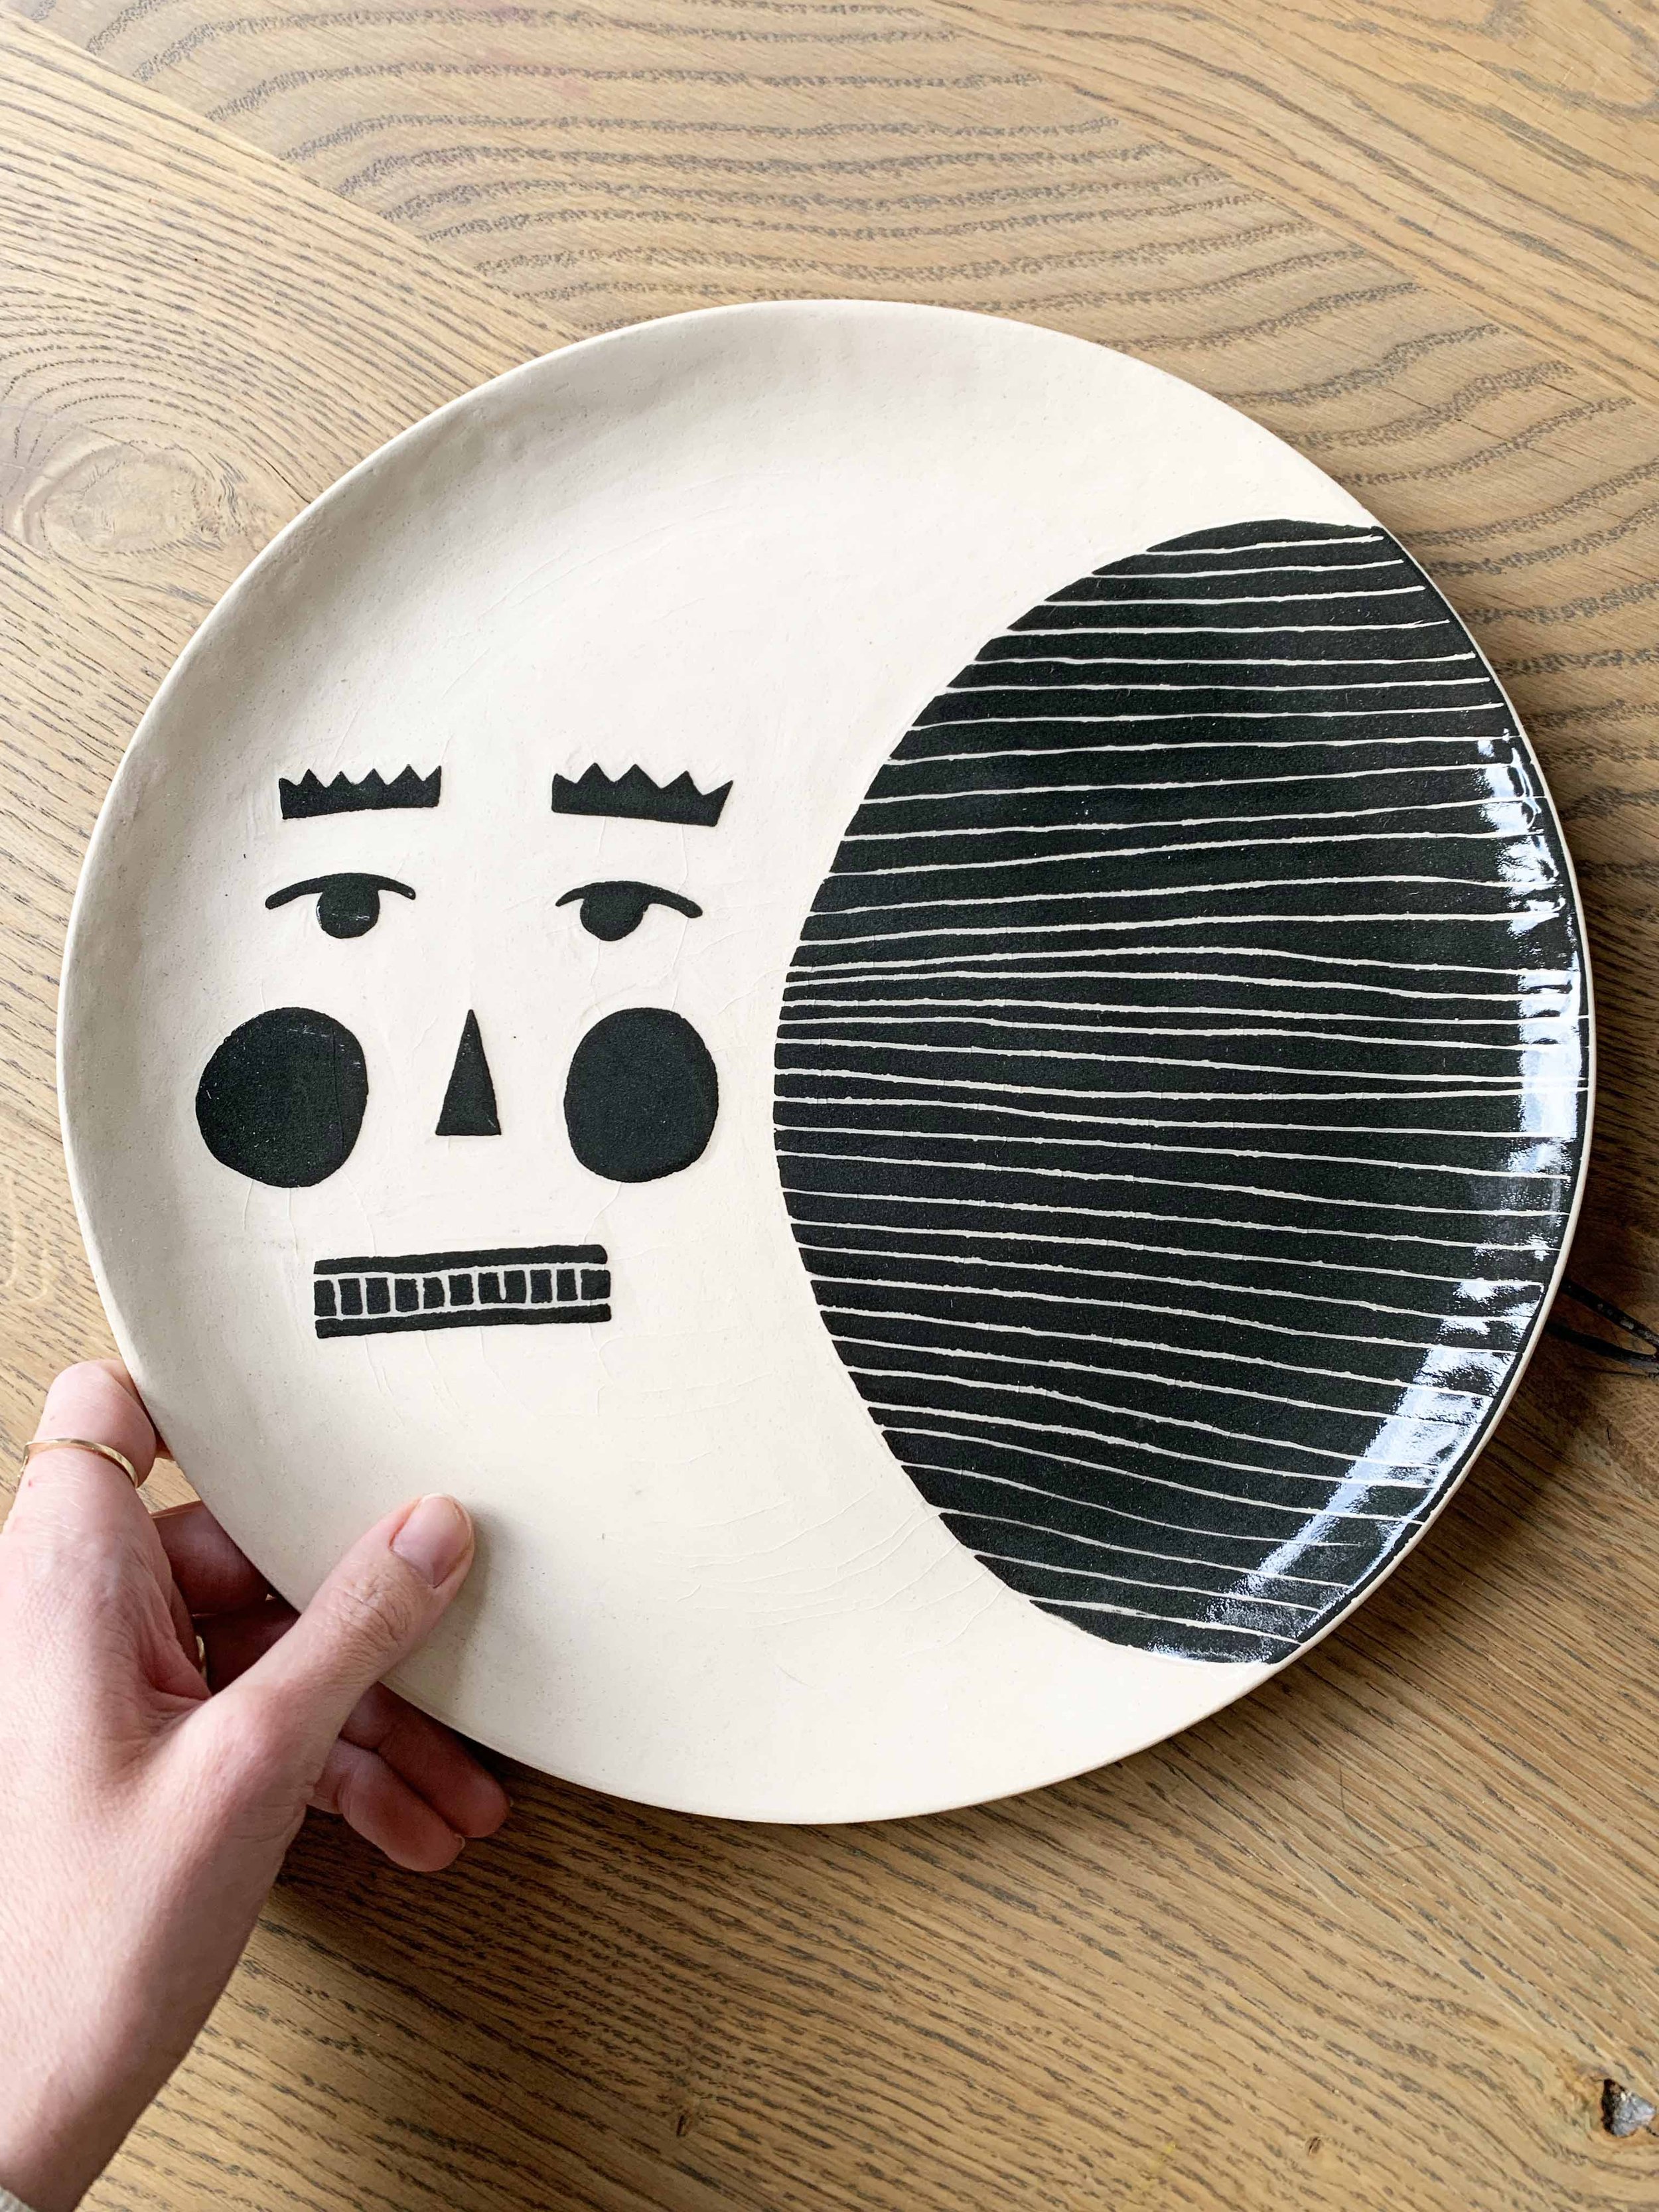 Handmade Sgraffito Ceramic Plates by Kay (available in shop), 2022